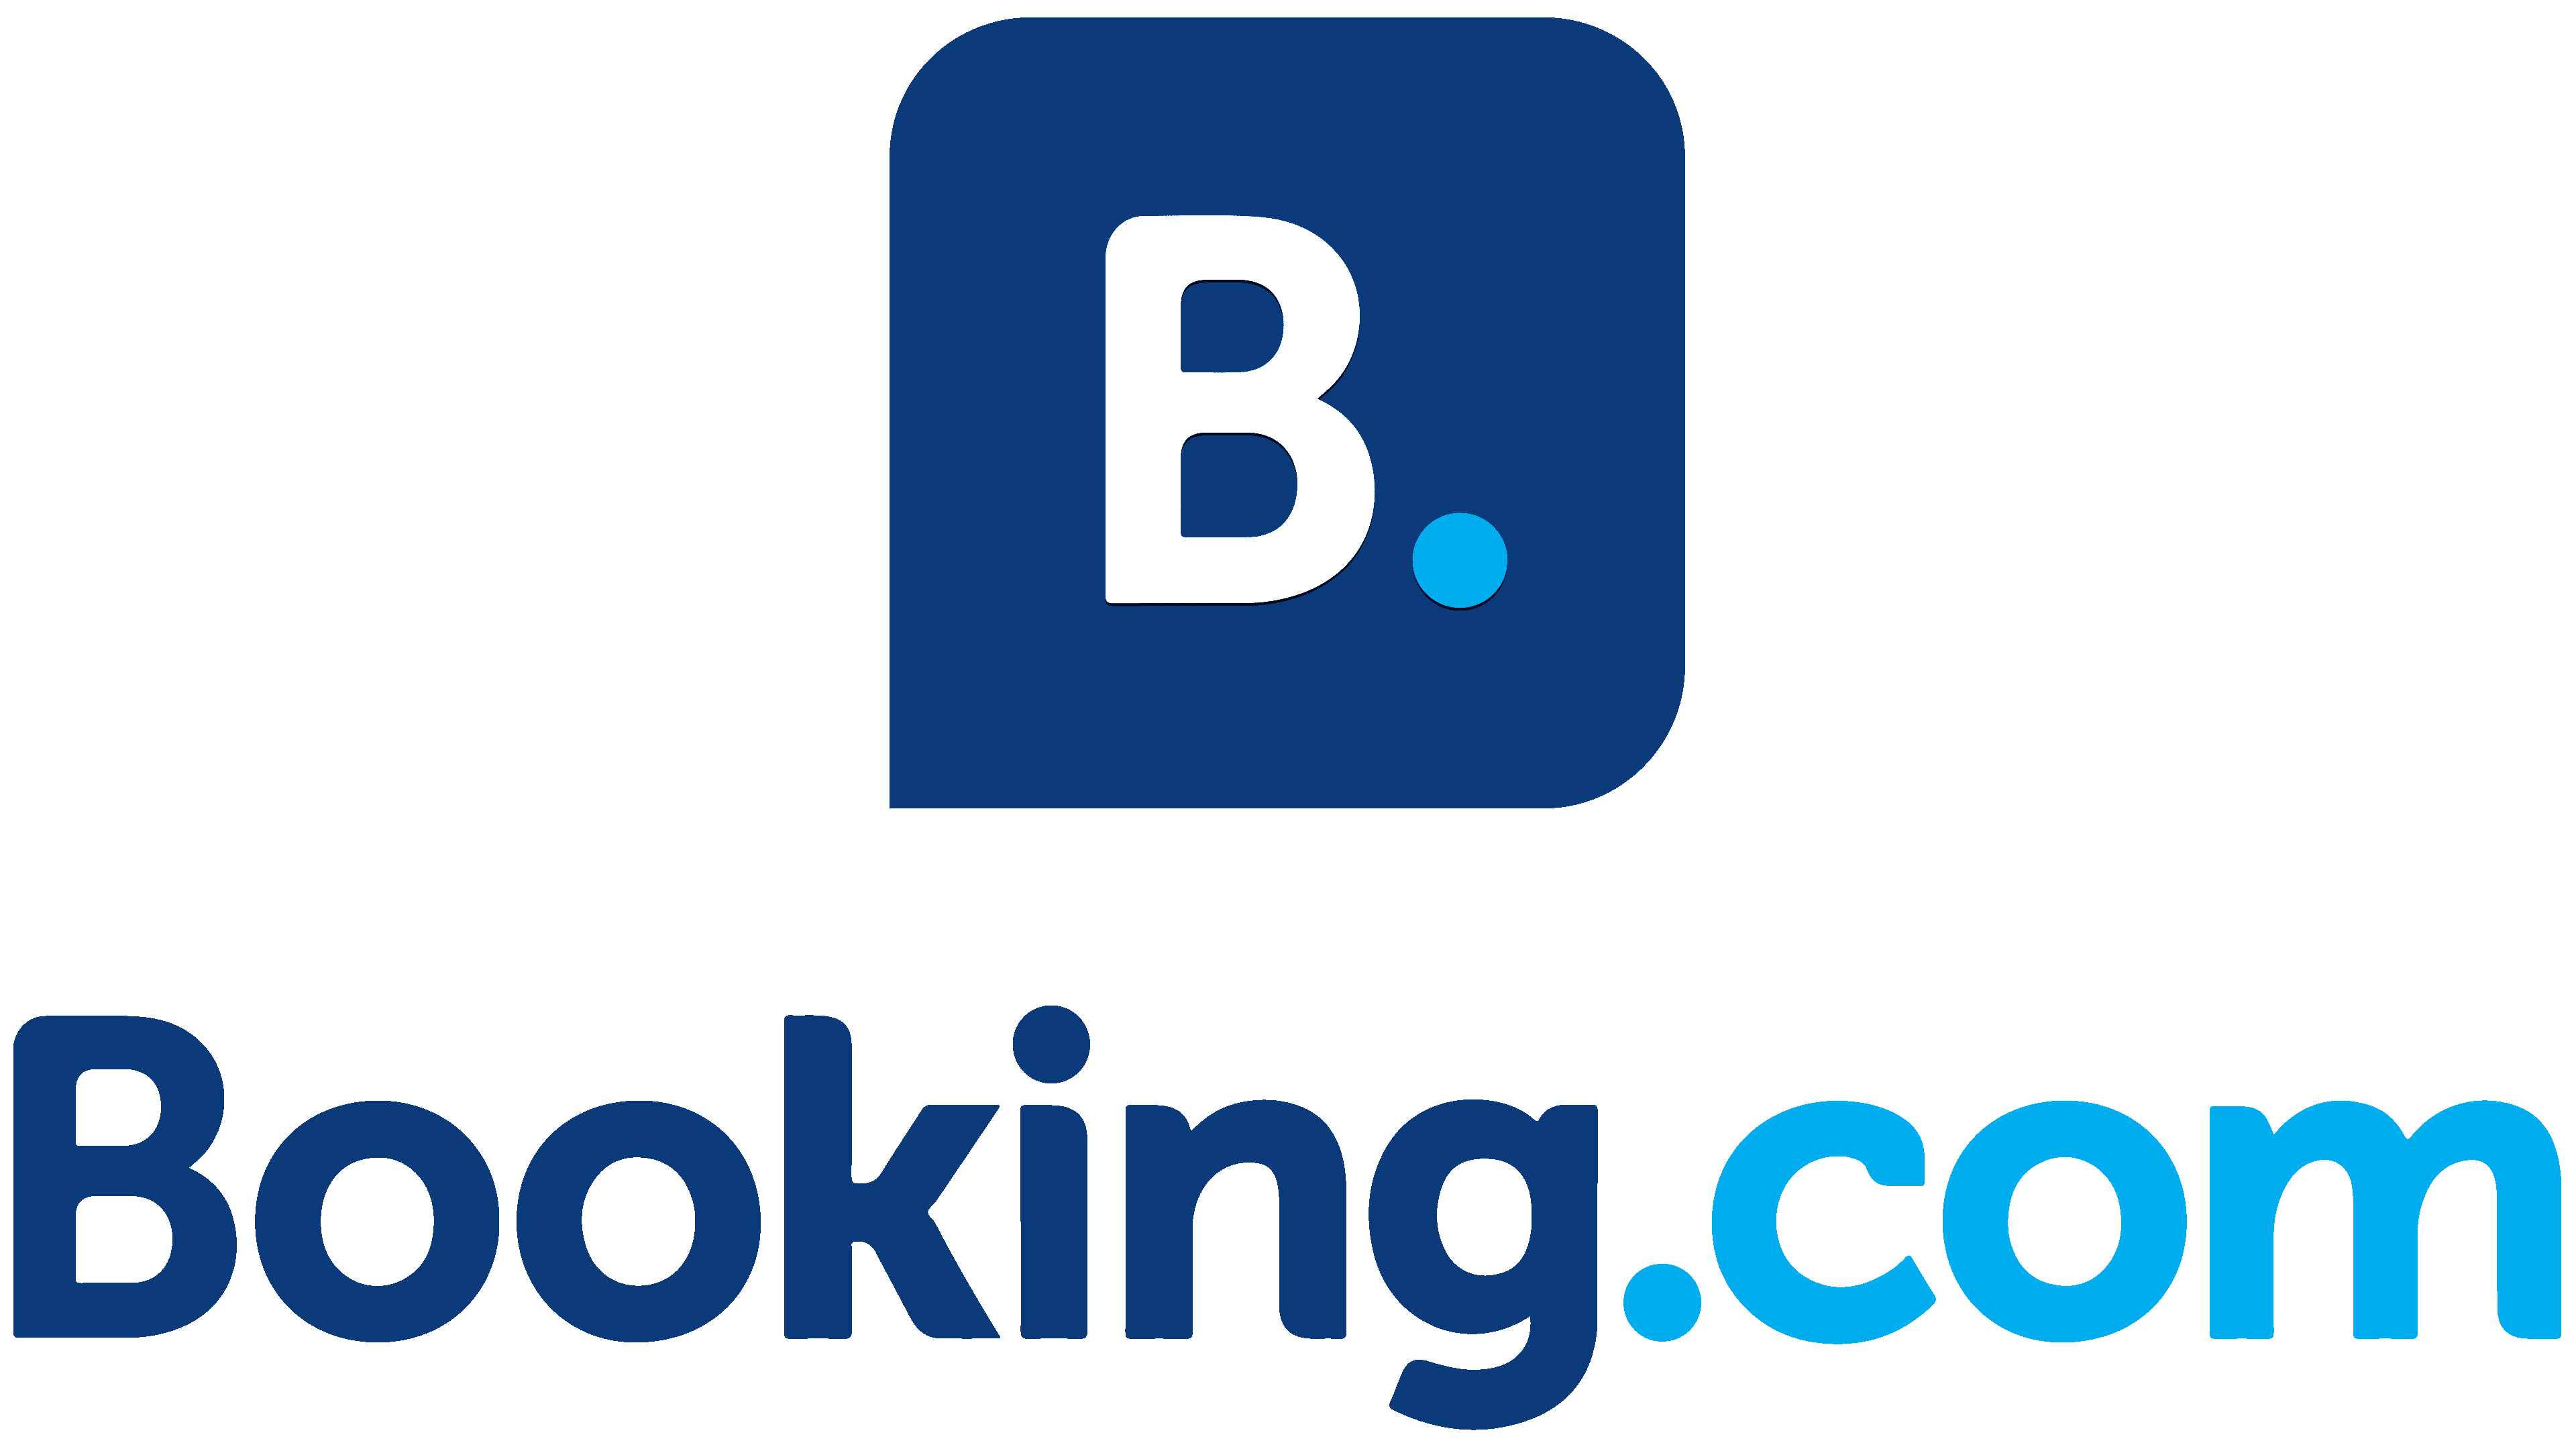 Review us on Booking.com